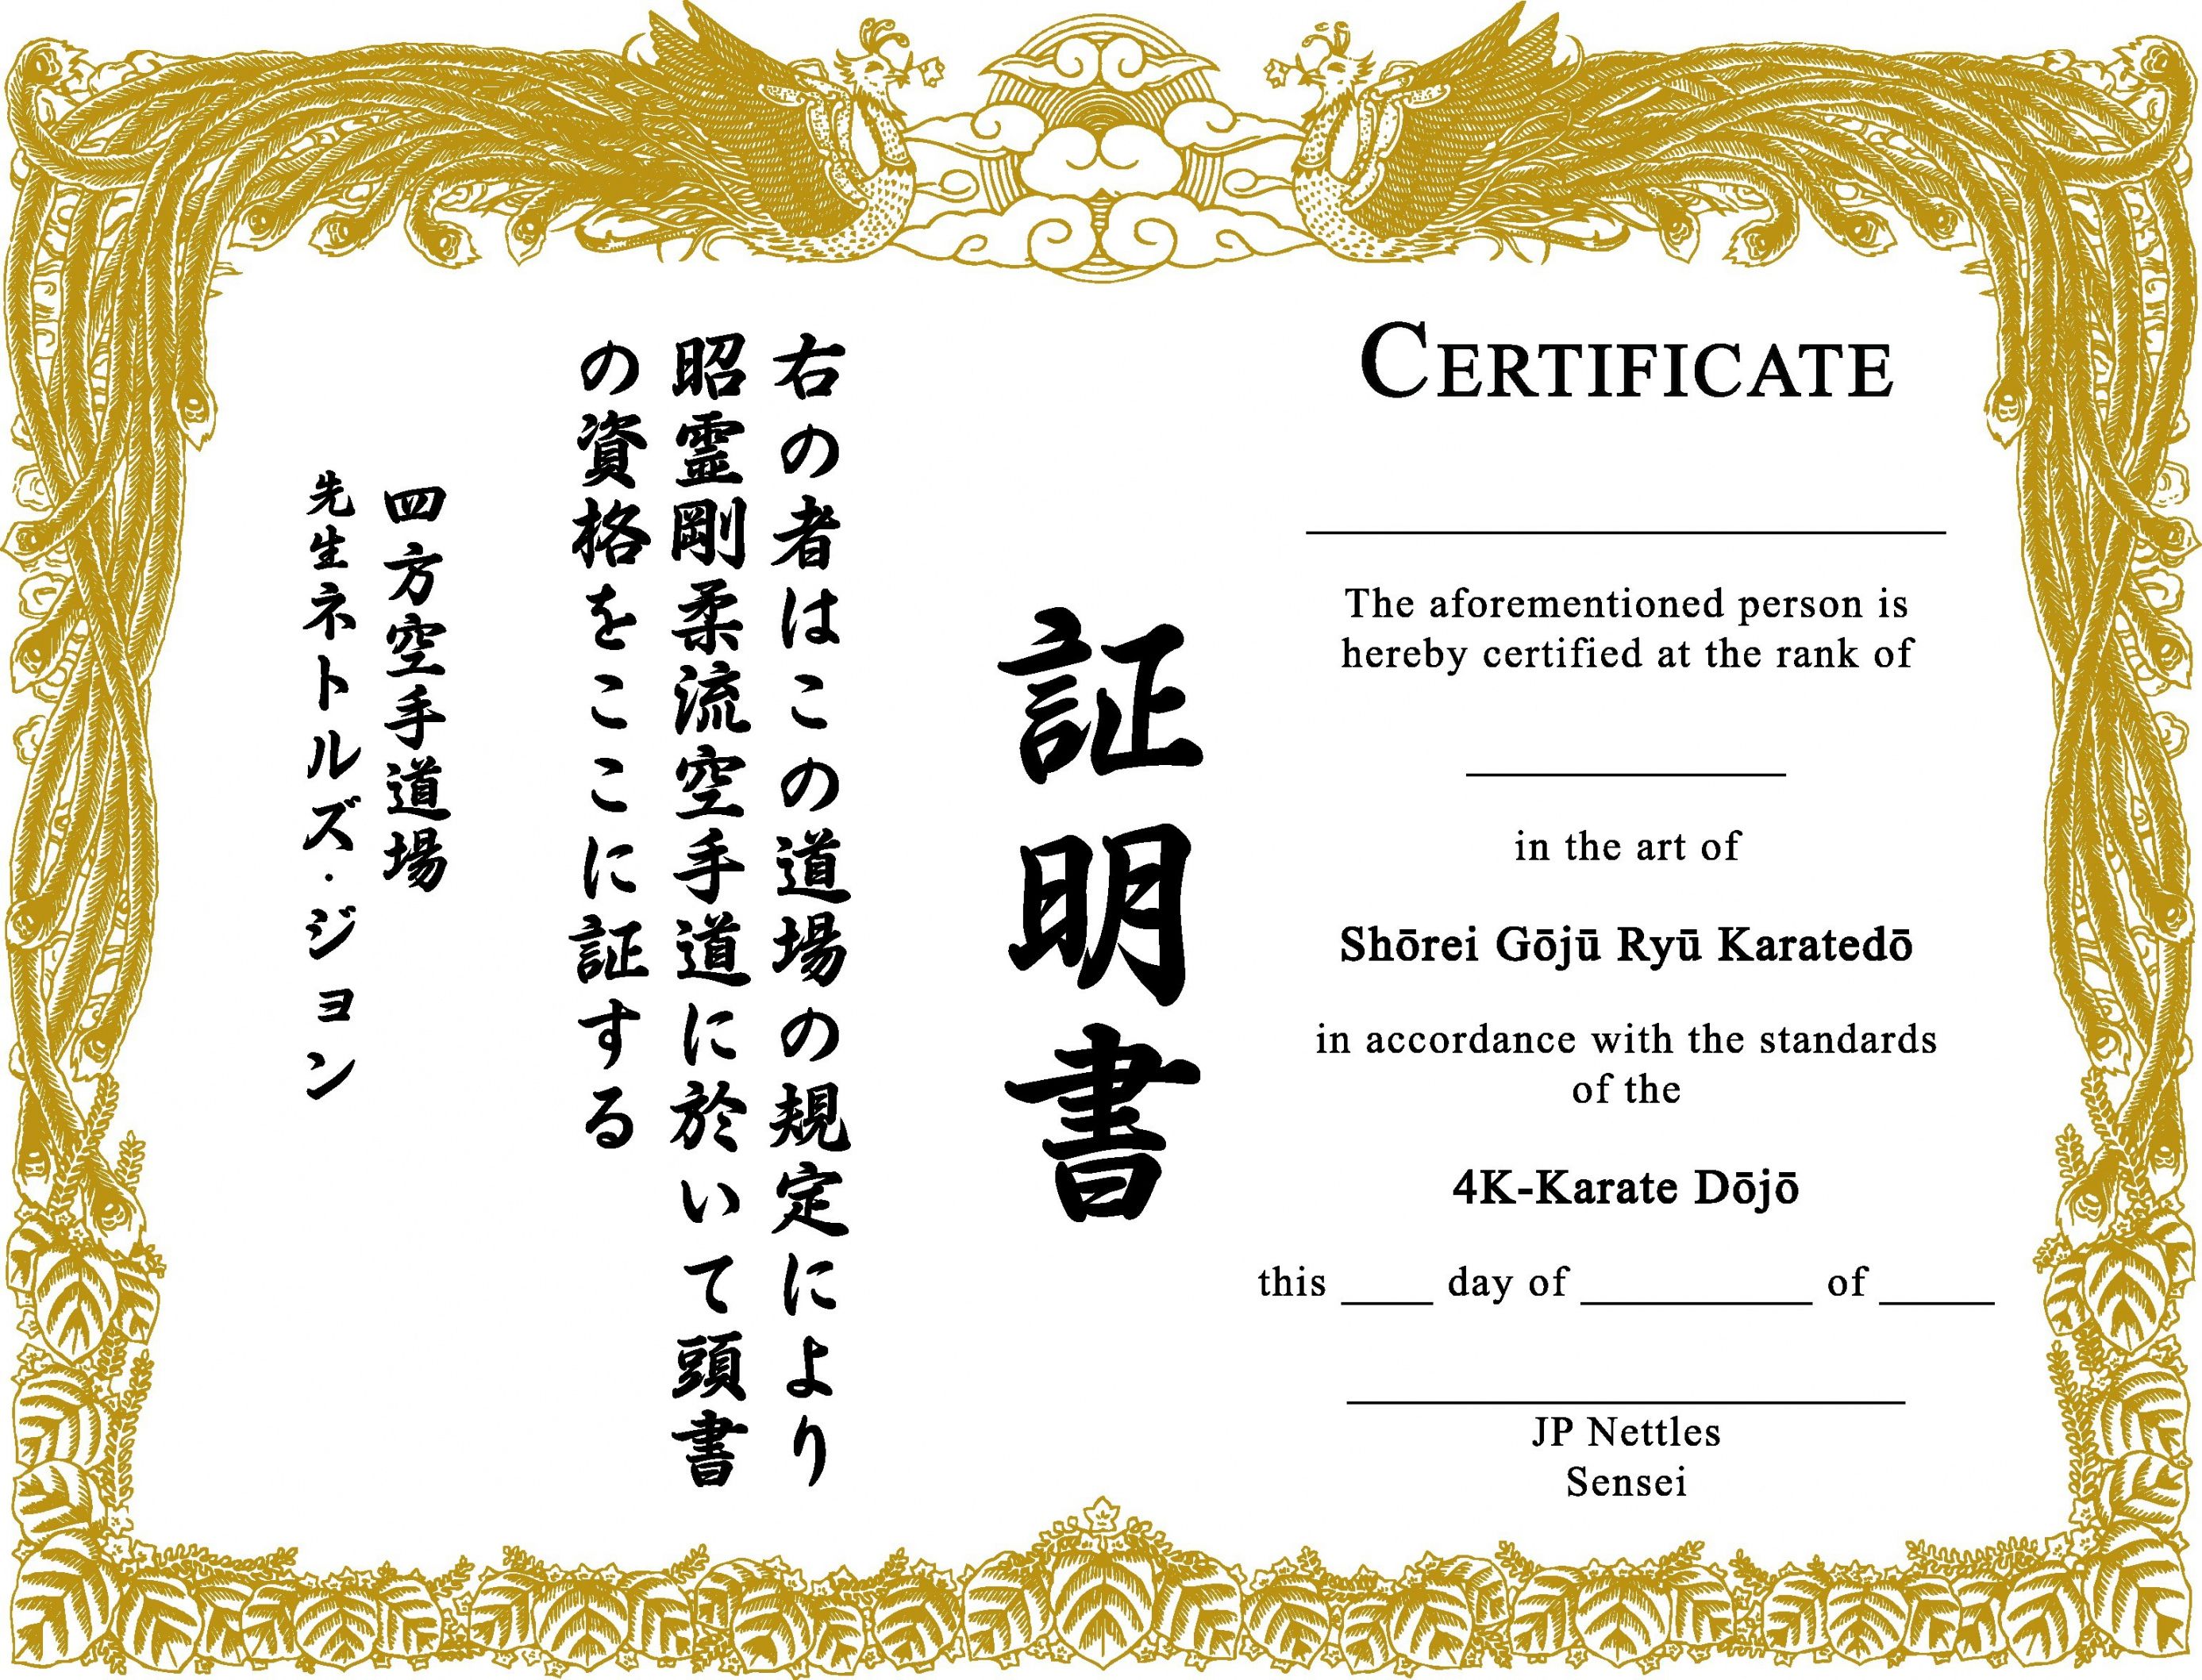 Browse Our Example of Karate Certificate Template | Art certificate